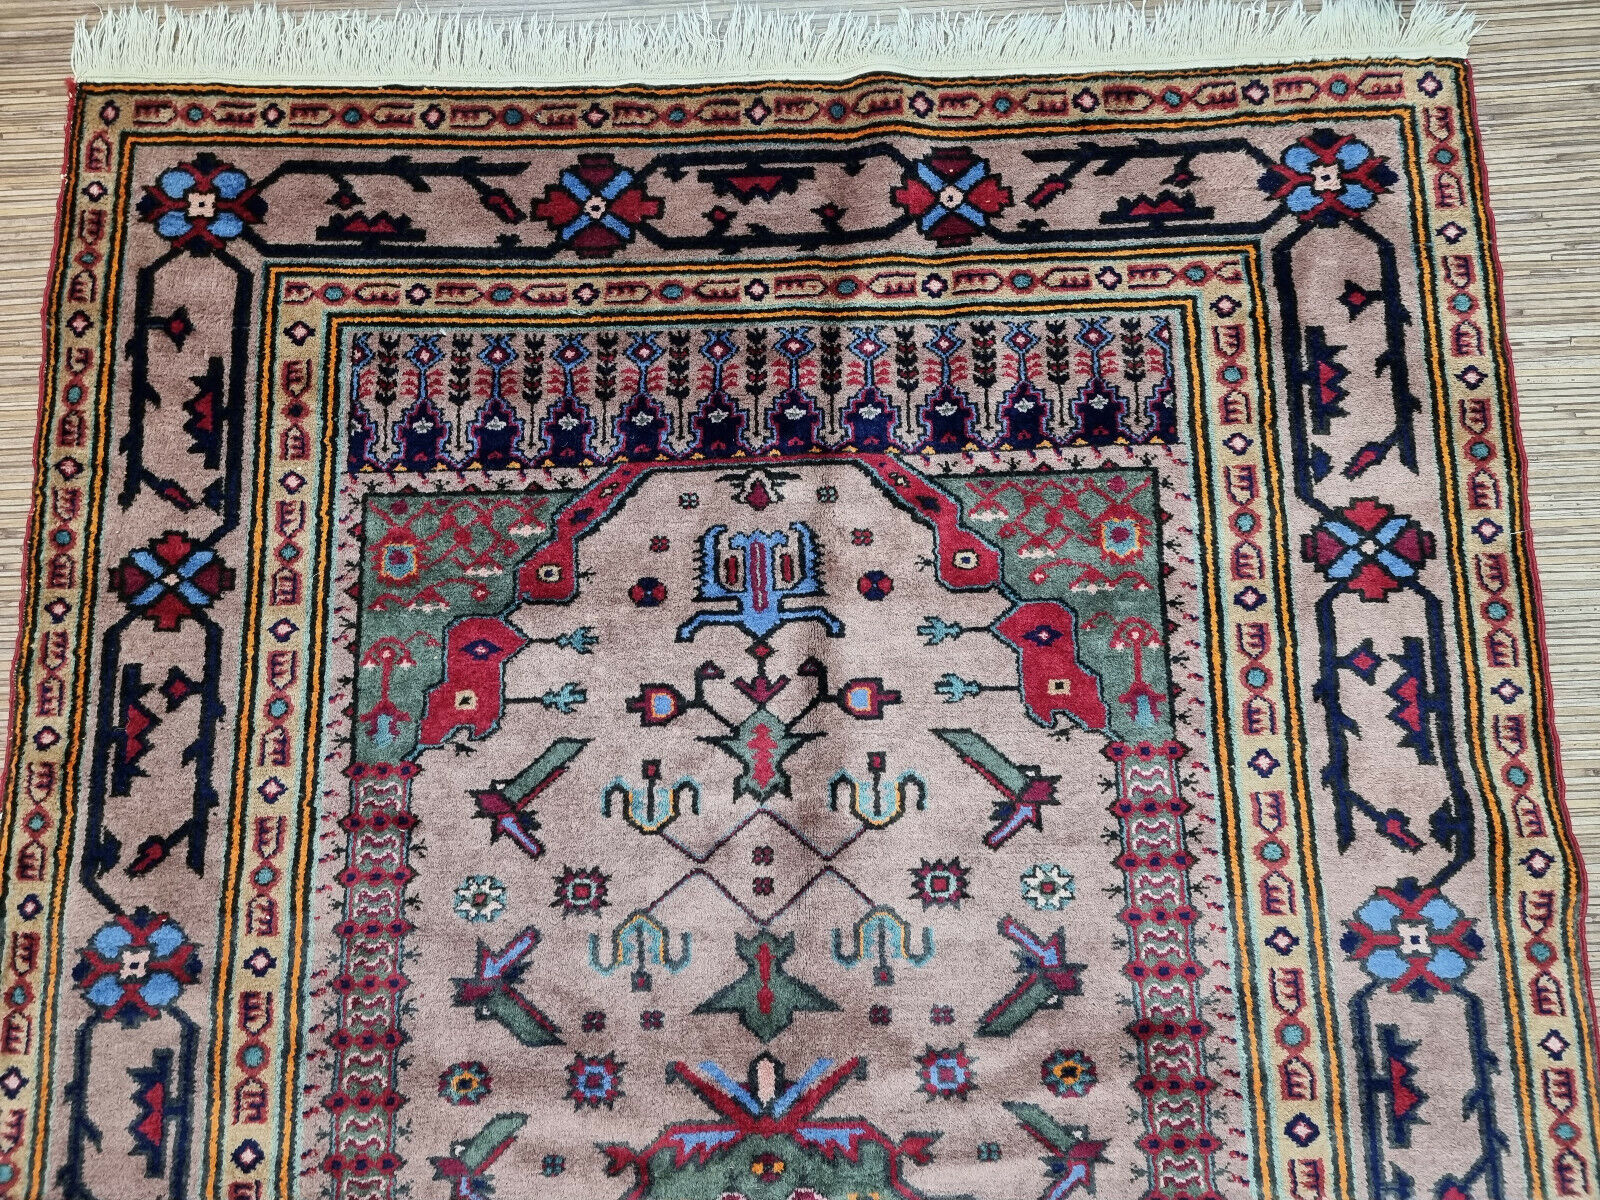 Close-up of craftsmanship on Handmade Vintage Caucasian Shirvan Rug - Detailed view showcasing the craftsmanship involved in creating the rug's intricate pattern.